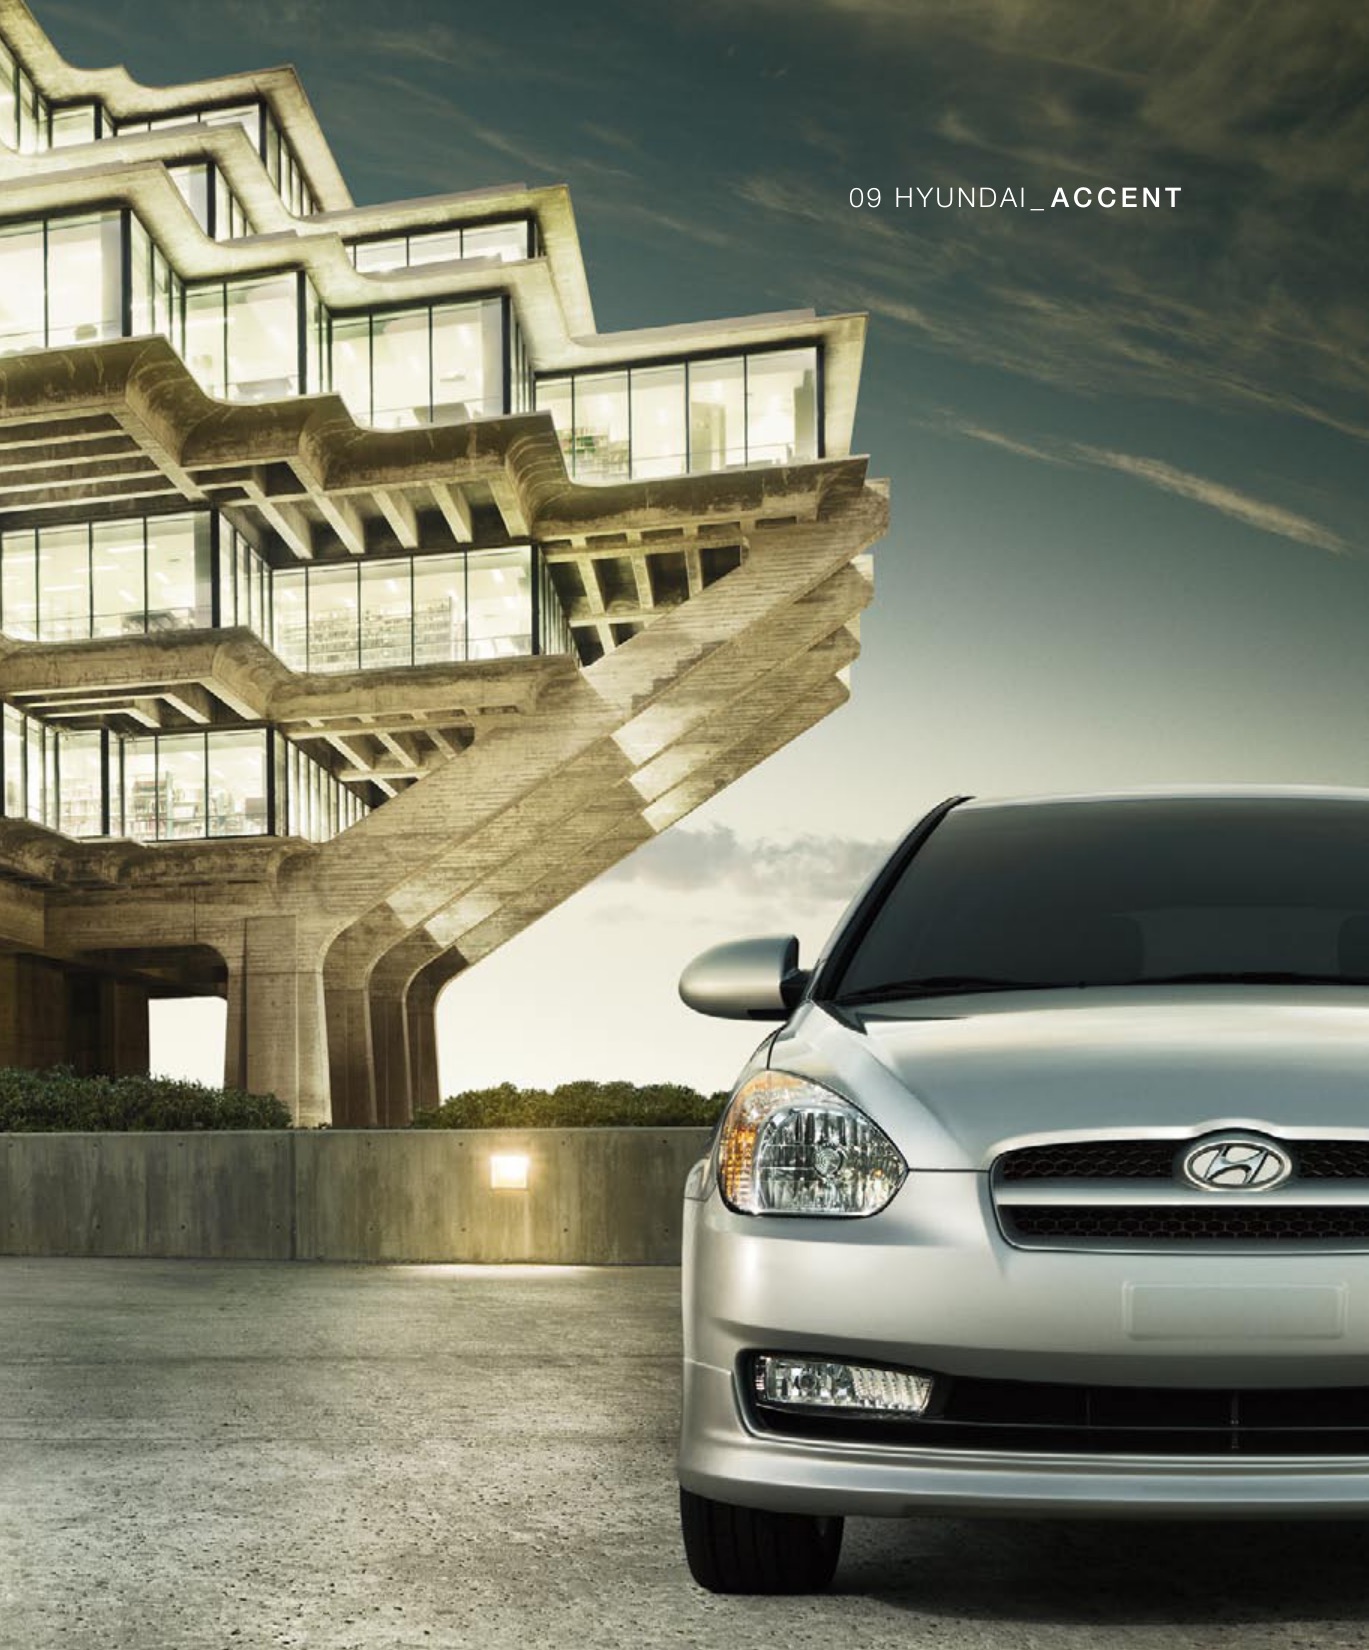 2009 Hyundai Accent Brochure Page 2